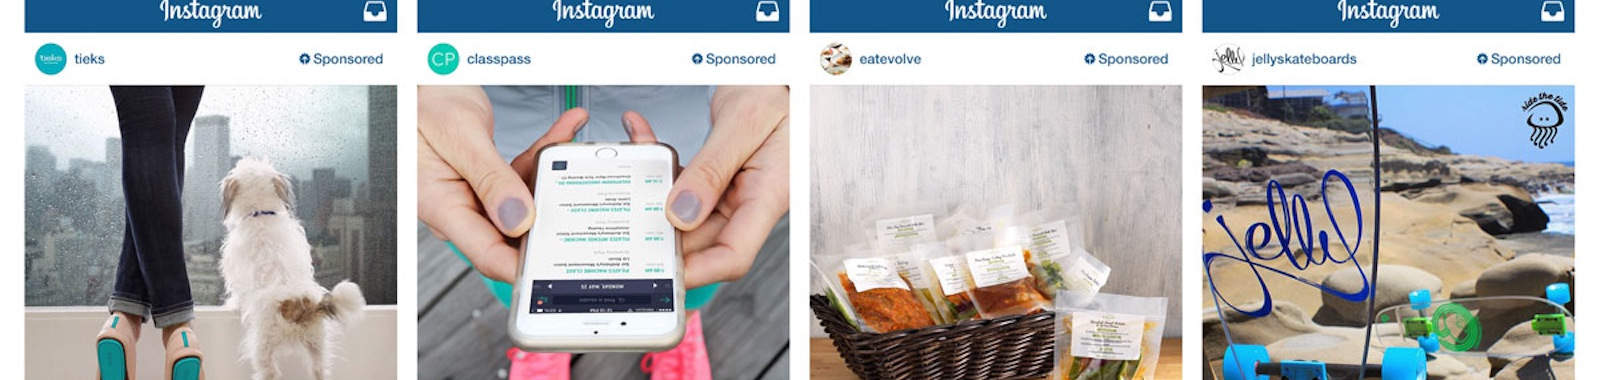 3D Touch Instagram ads are on the way.